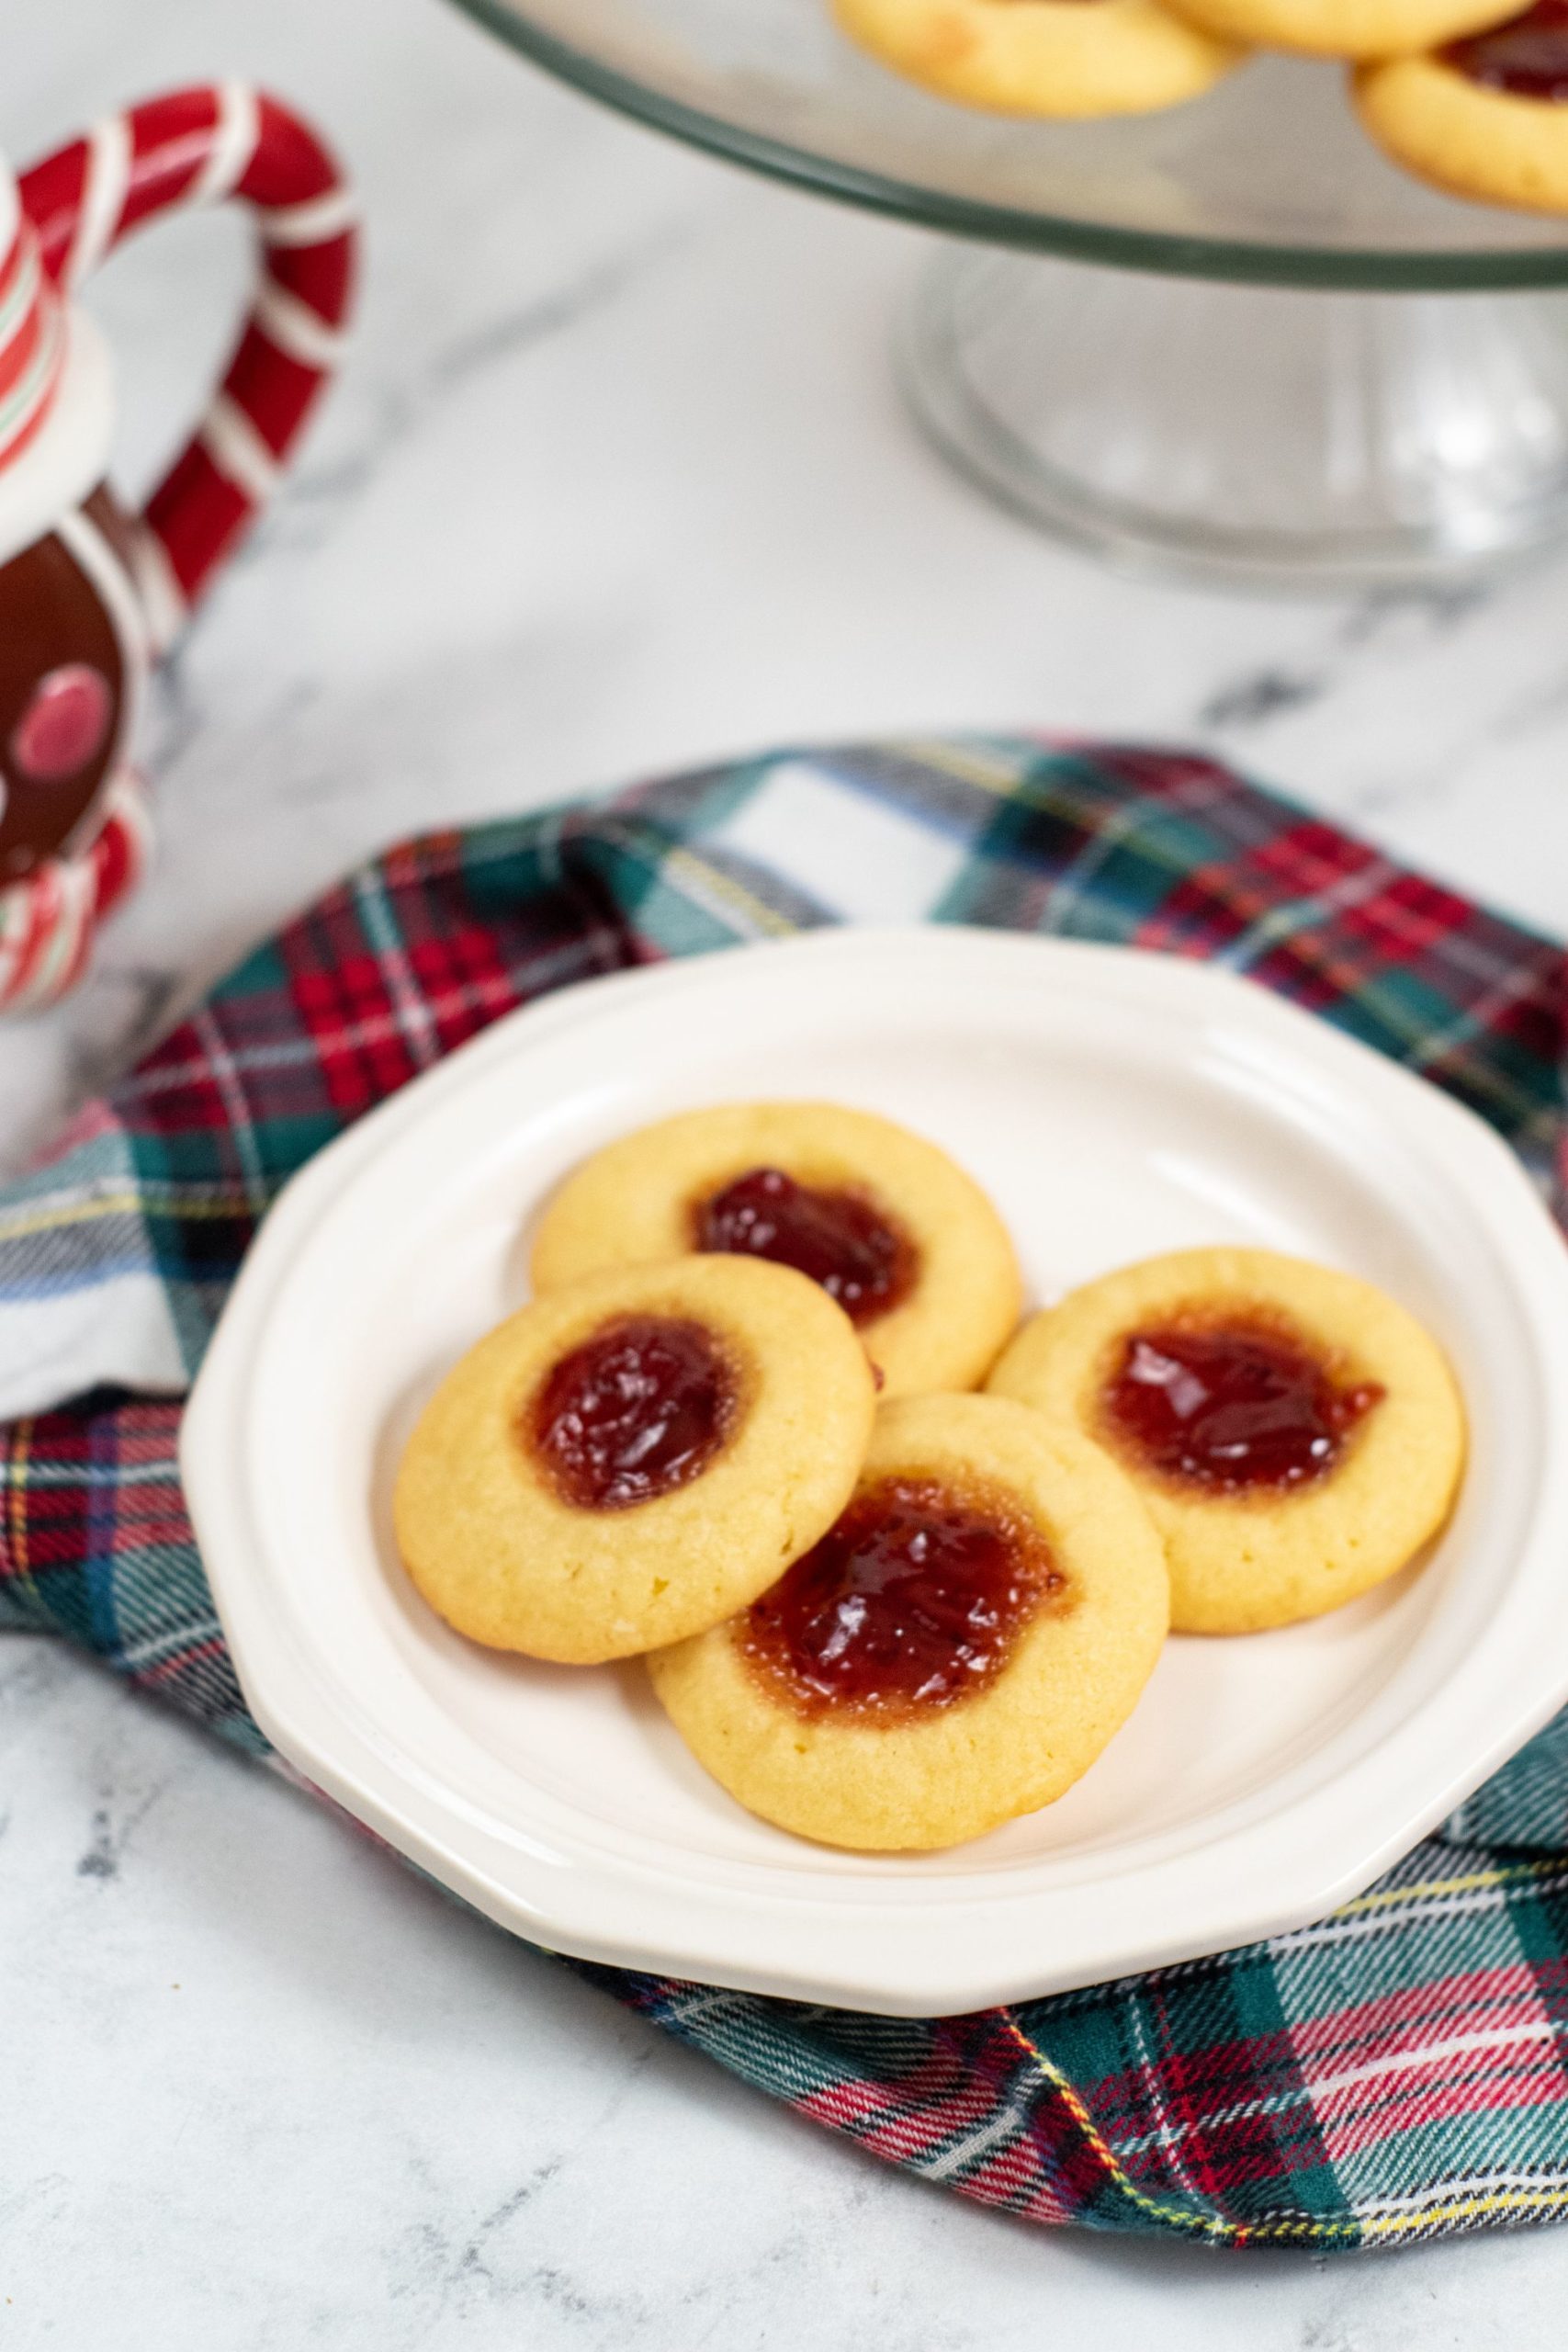 old fashioned thumbprint cookies on a white plate with a plaid napkin